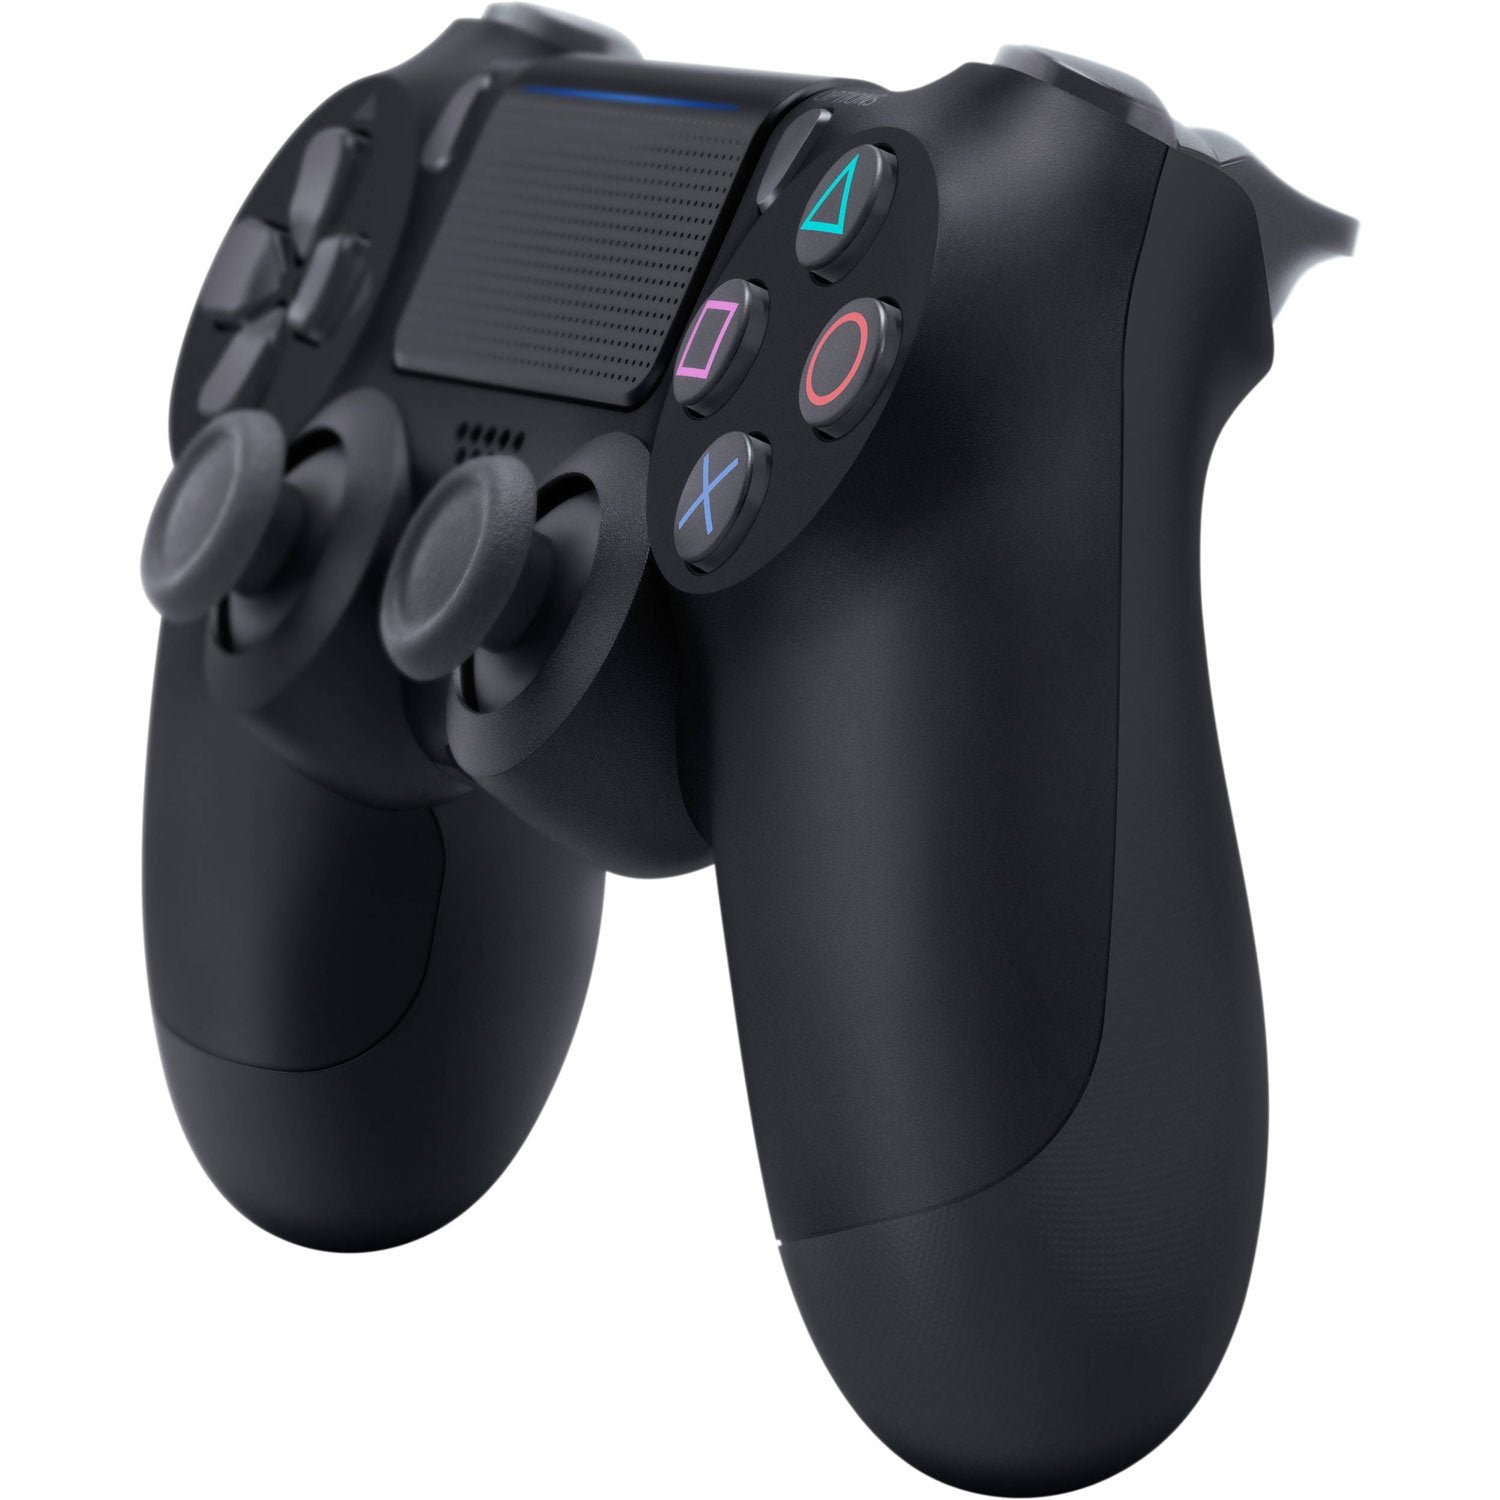 PS4 DualShock 4 won't work with PS5 games, Sony confirms - GameRevolution